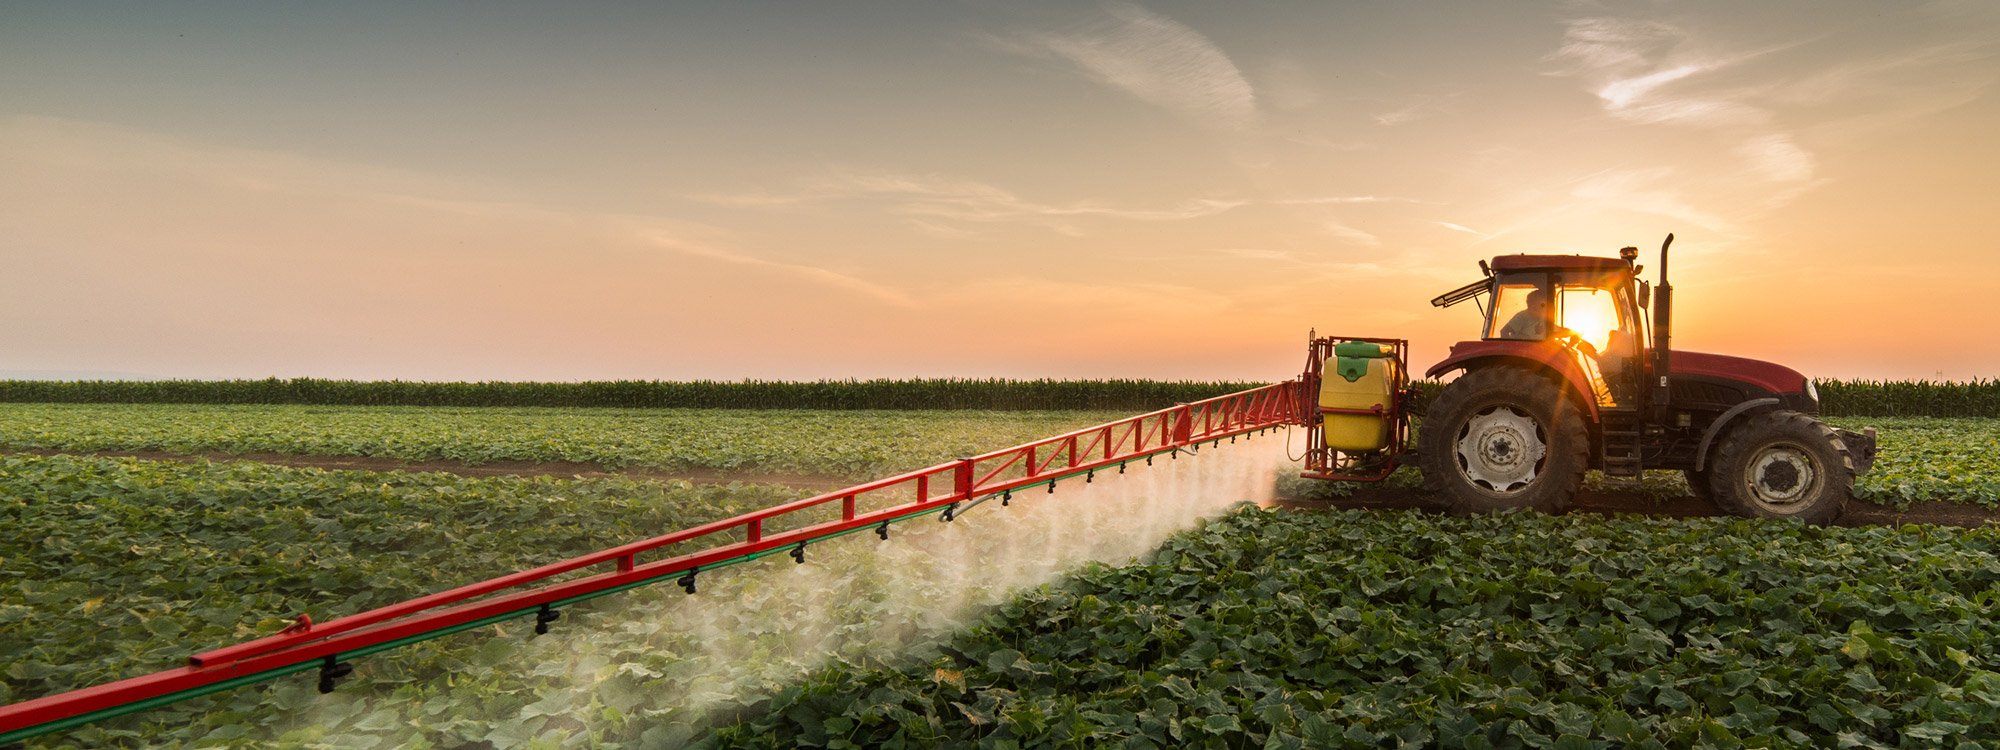 Ultracomp® Bearings Lead the Field for Agricultural Use